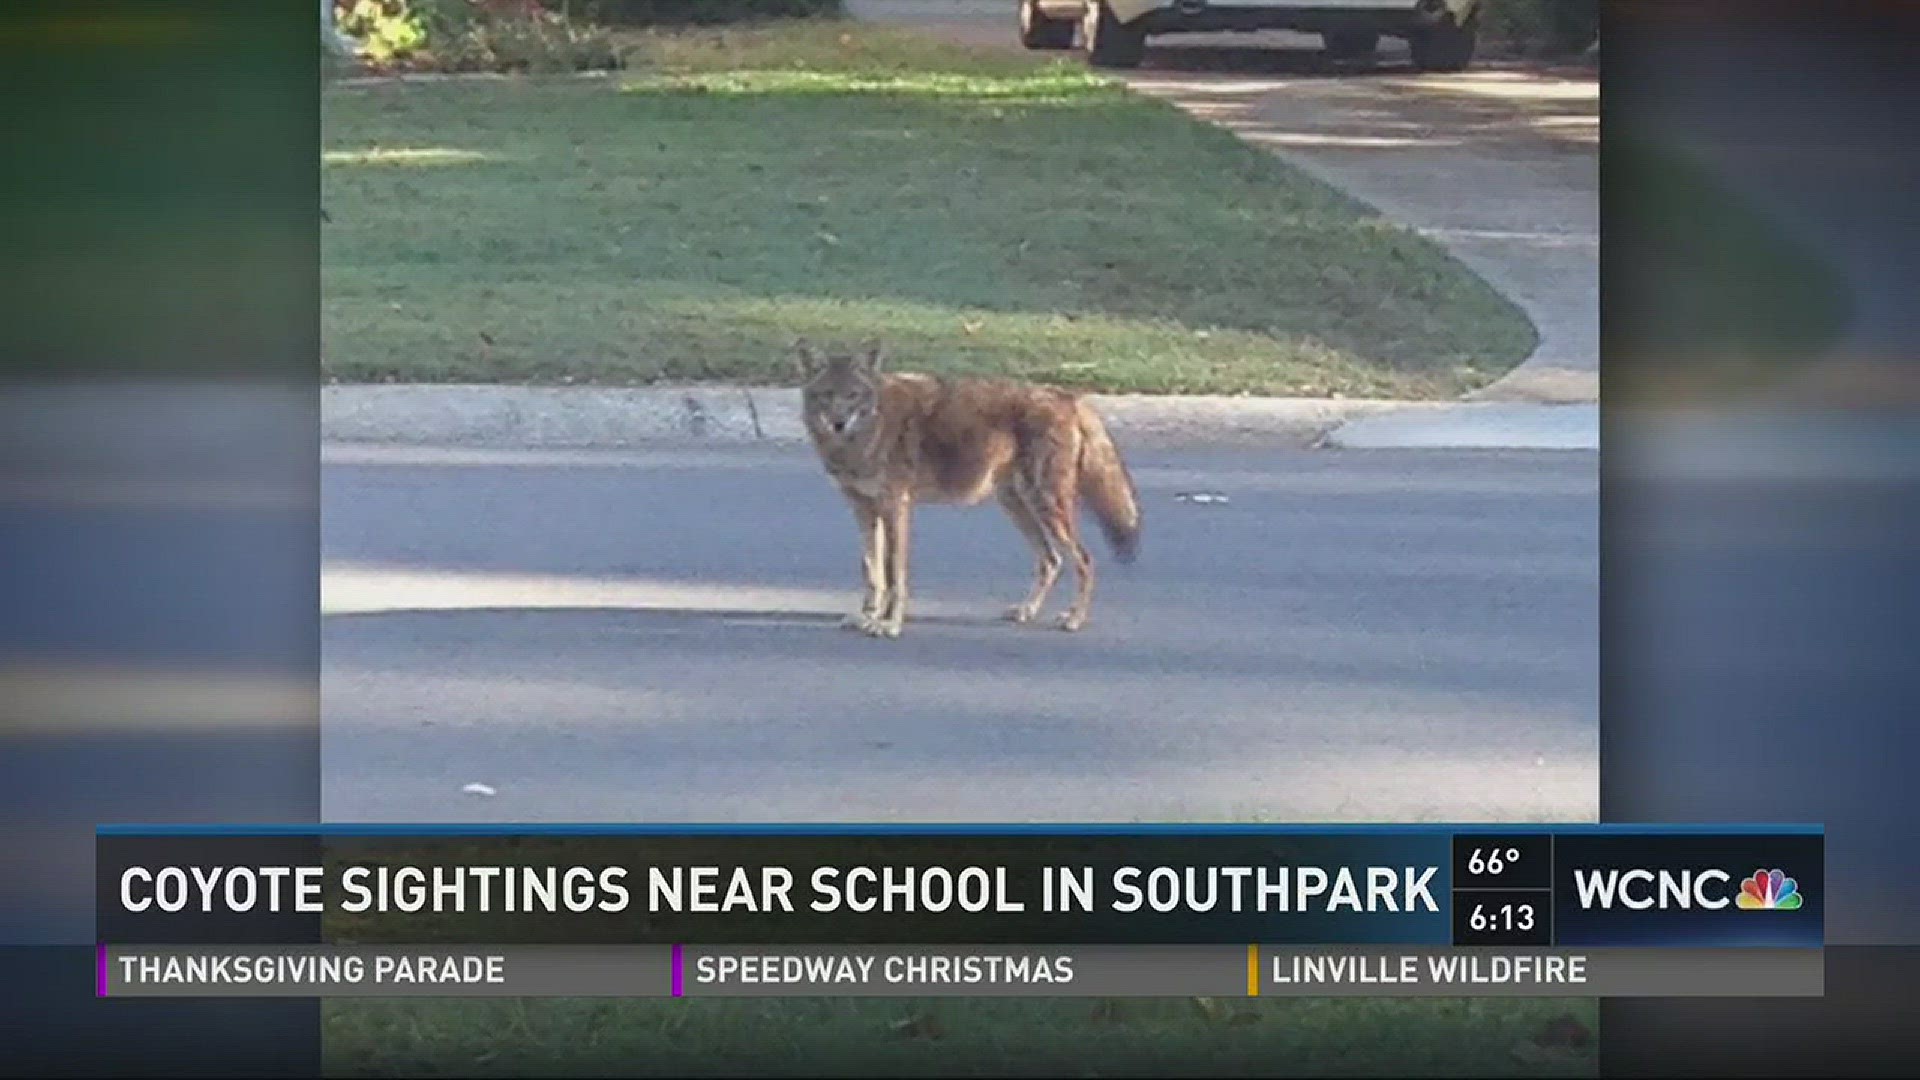 Trick or treaters in Charlotte may be in for a real-life scare as coyote sightings were reported near a school in SouthPark.